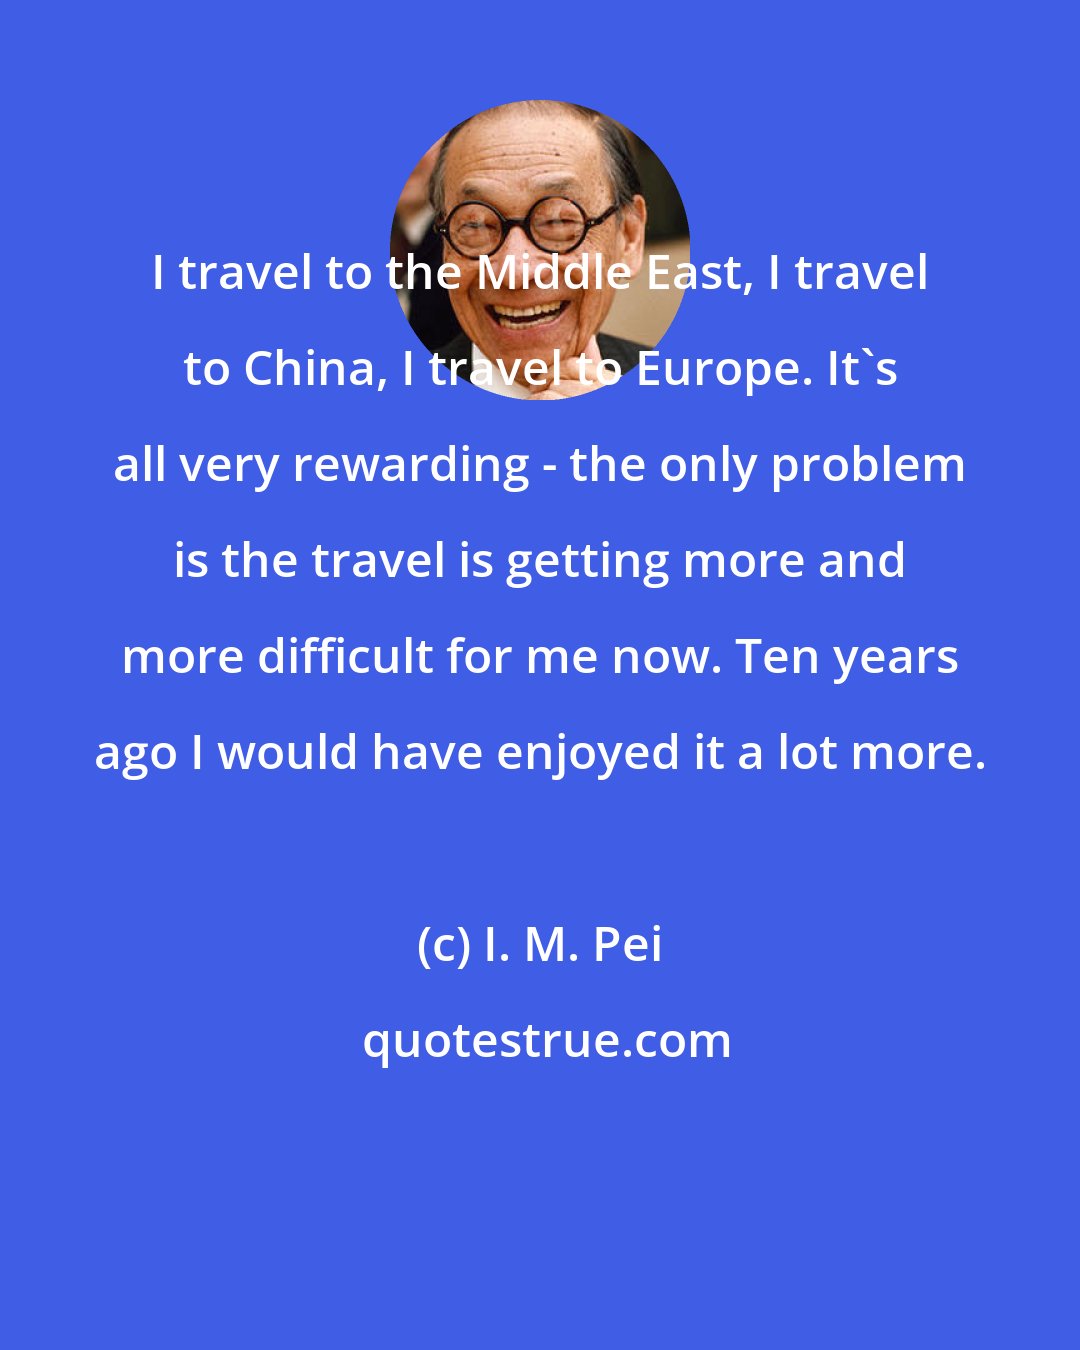 I. M. Pei: I travel to the Middle East, I travel to China, I travel to Europe. It's all very rewarding - the only problem is the travel is getting more and more difficult for me now. Ten years ago I would have enjoyed it a lot more.